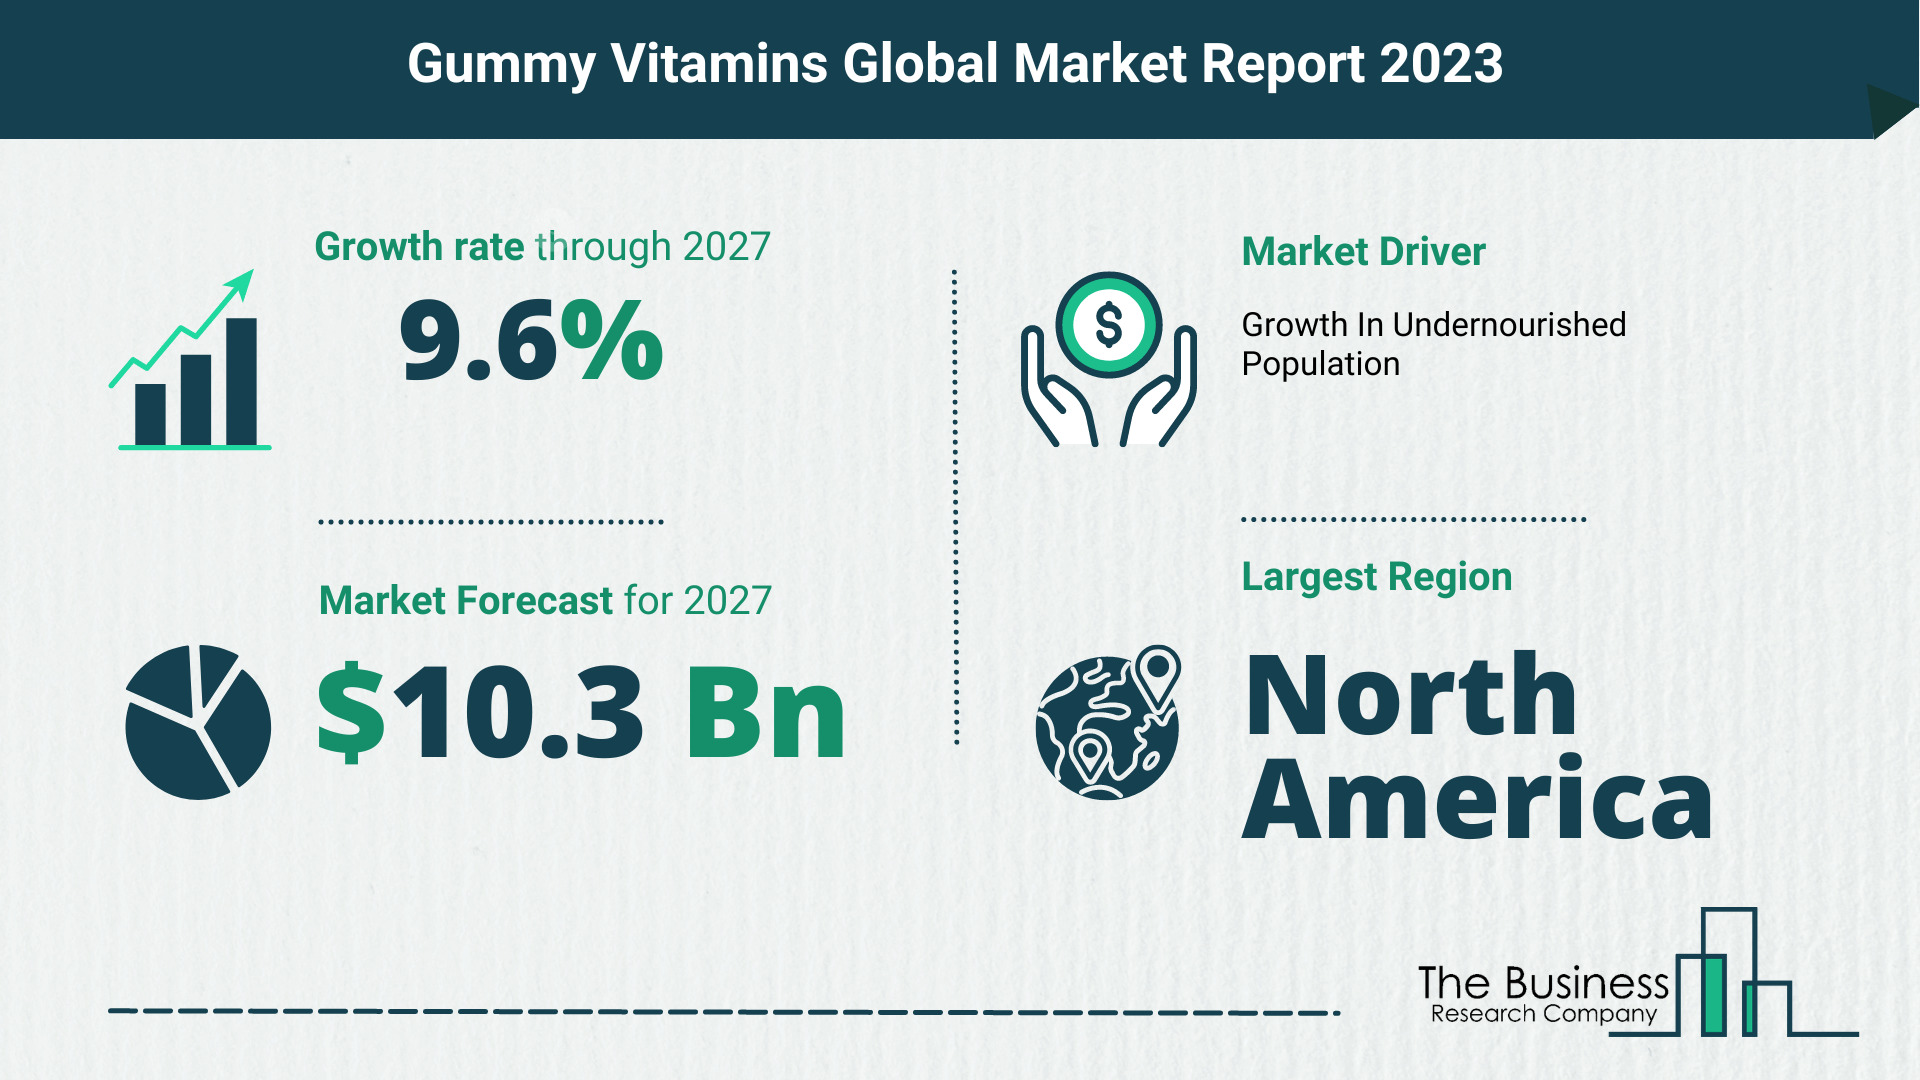 How Will The Gummy Vitamins Market Globally Expand In 2023?